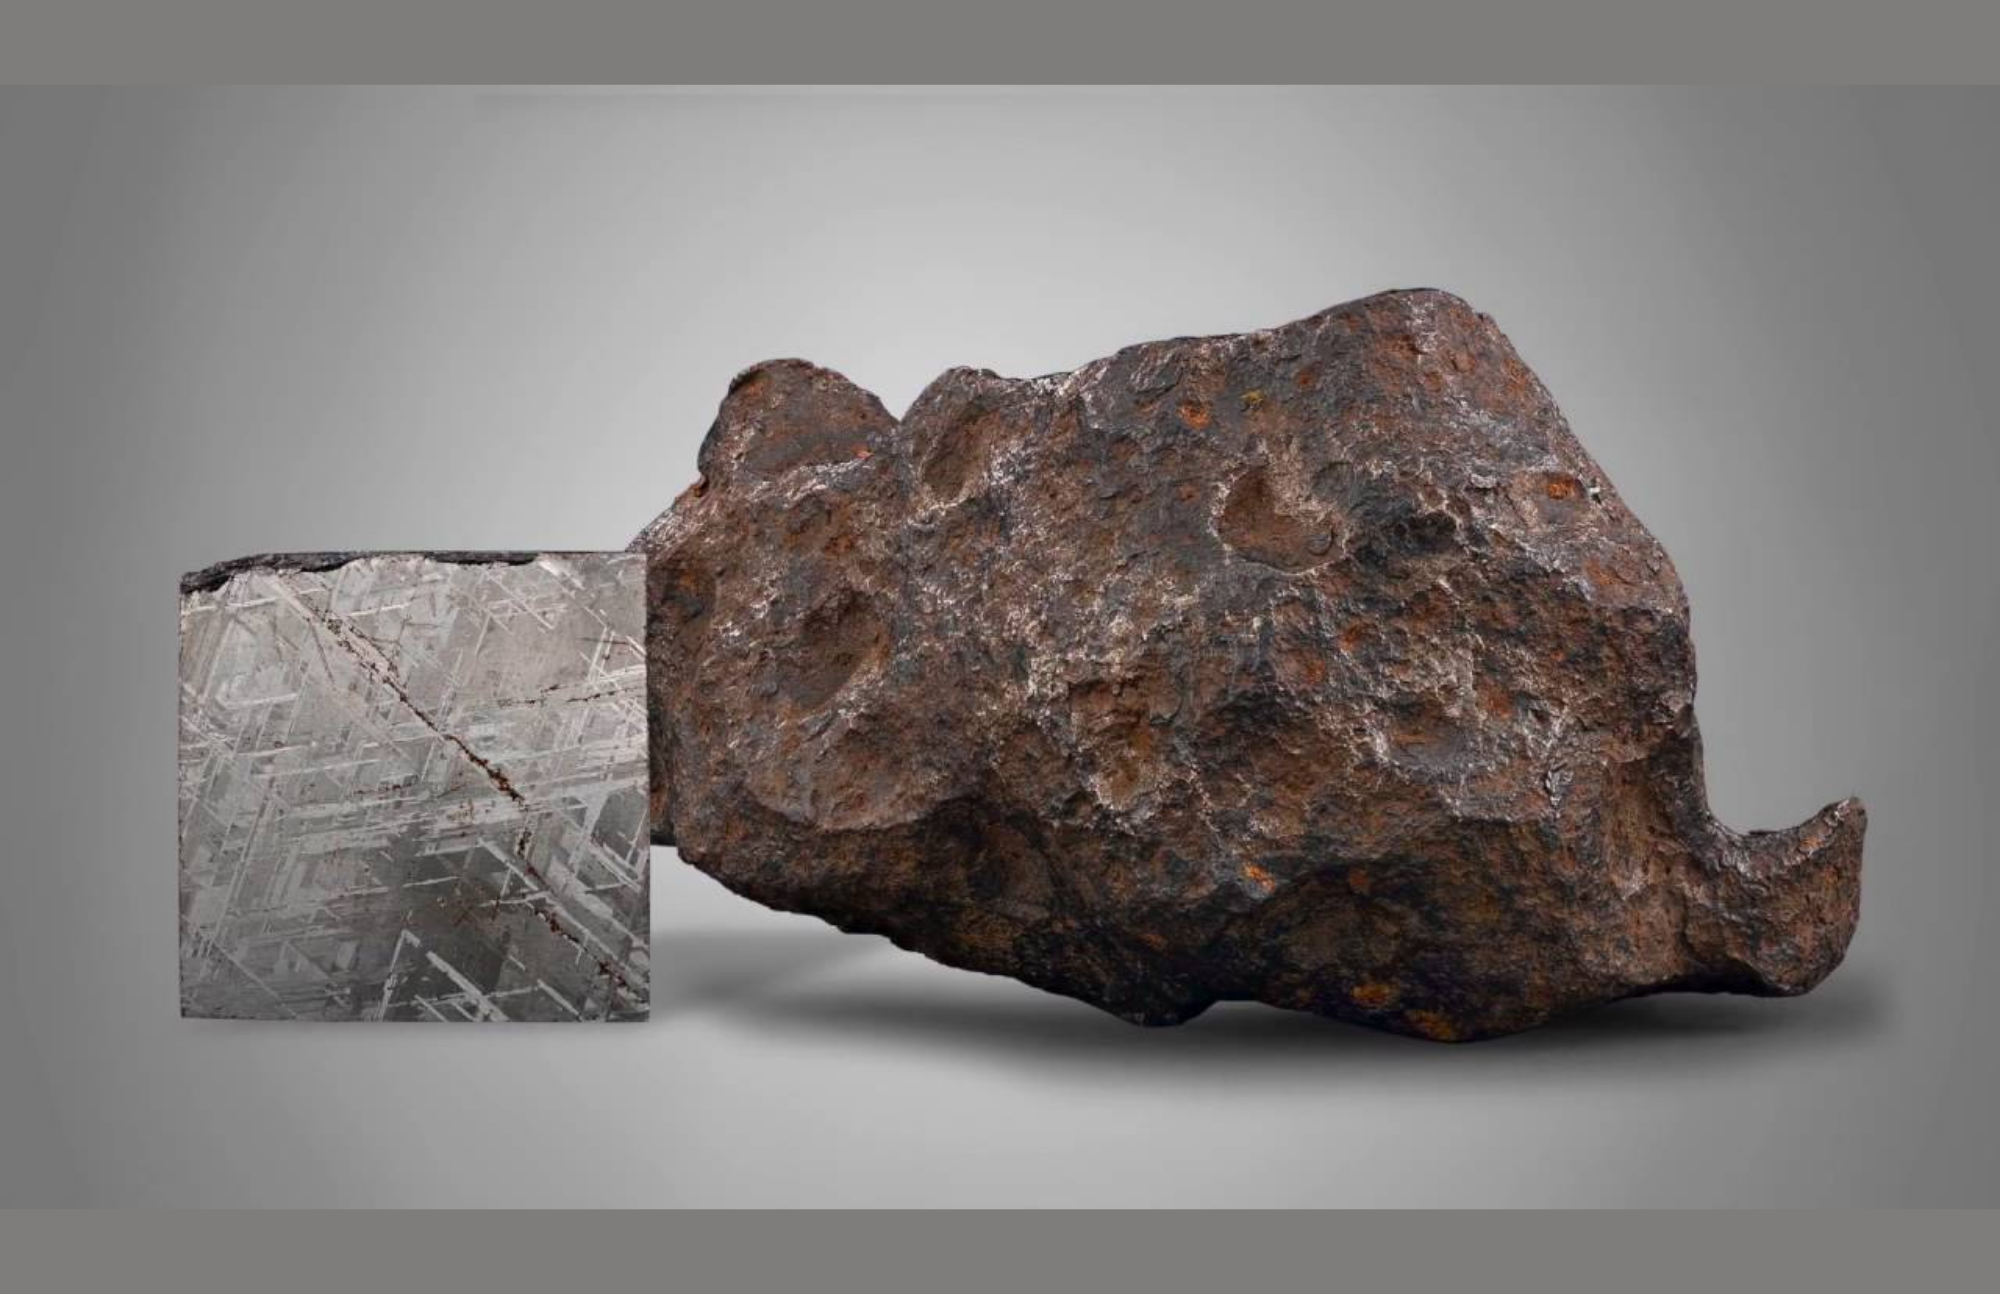 Gibeon Meteorite - The Unusual And Curiosity History Of This Meteor